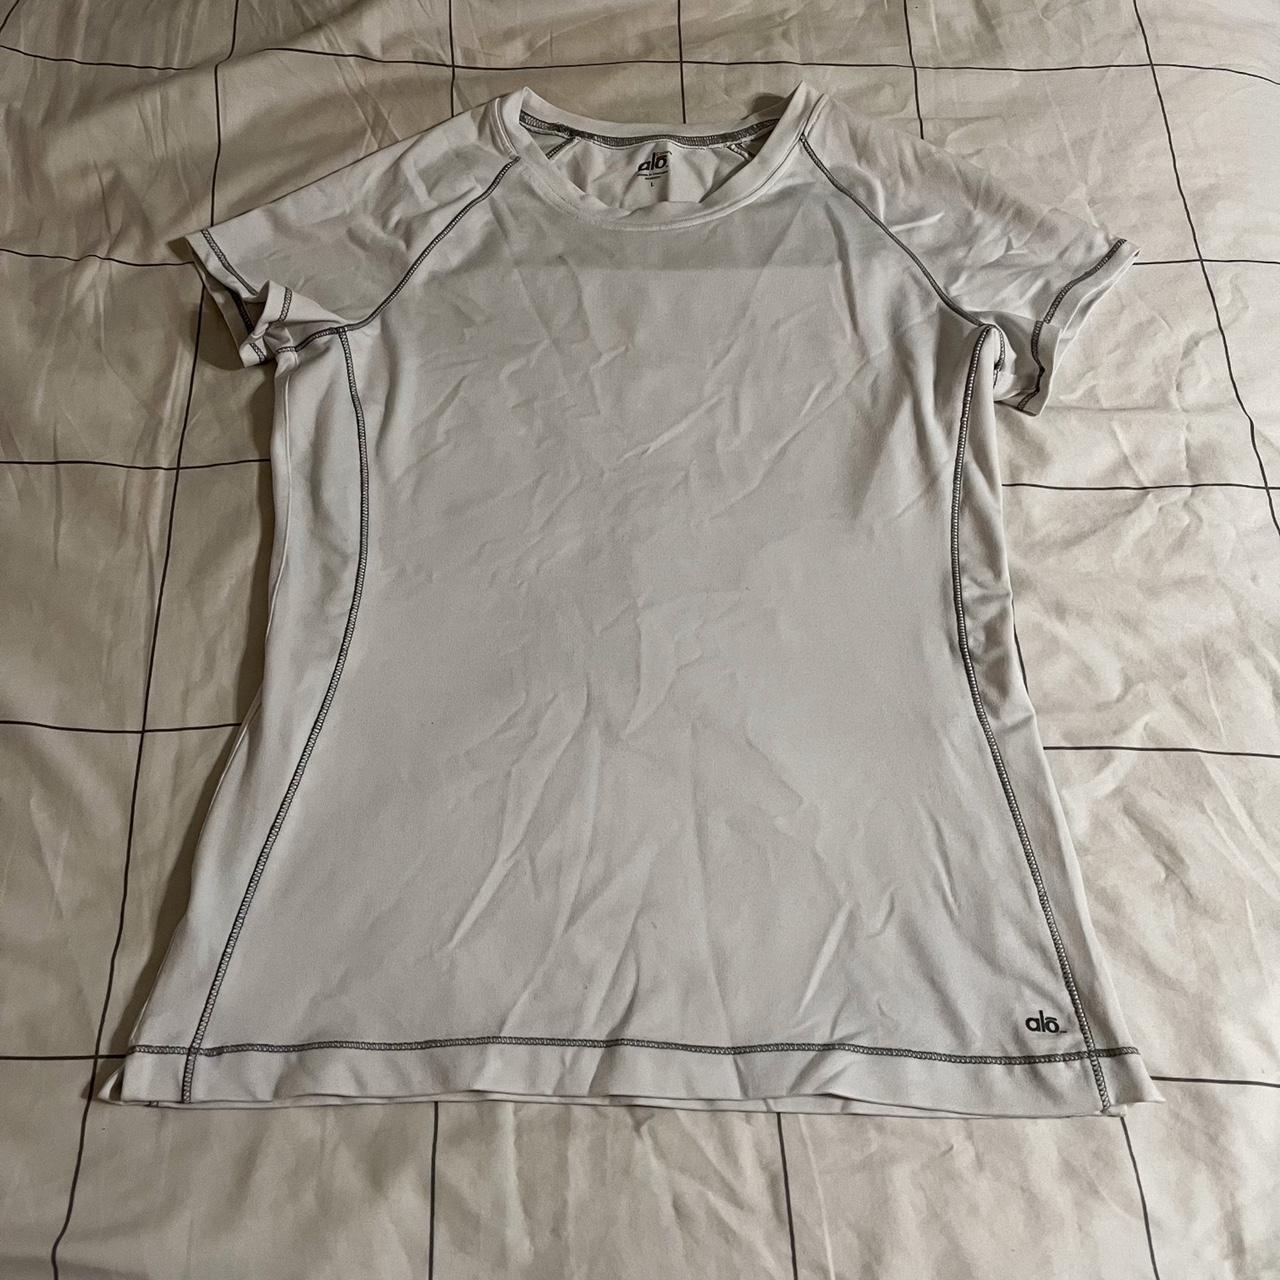 Product Image 1 - Gently used white workout top